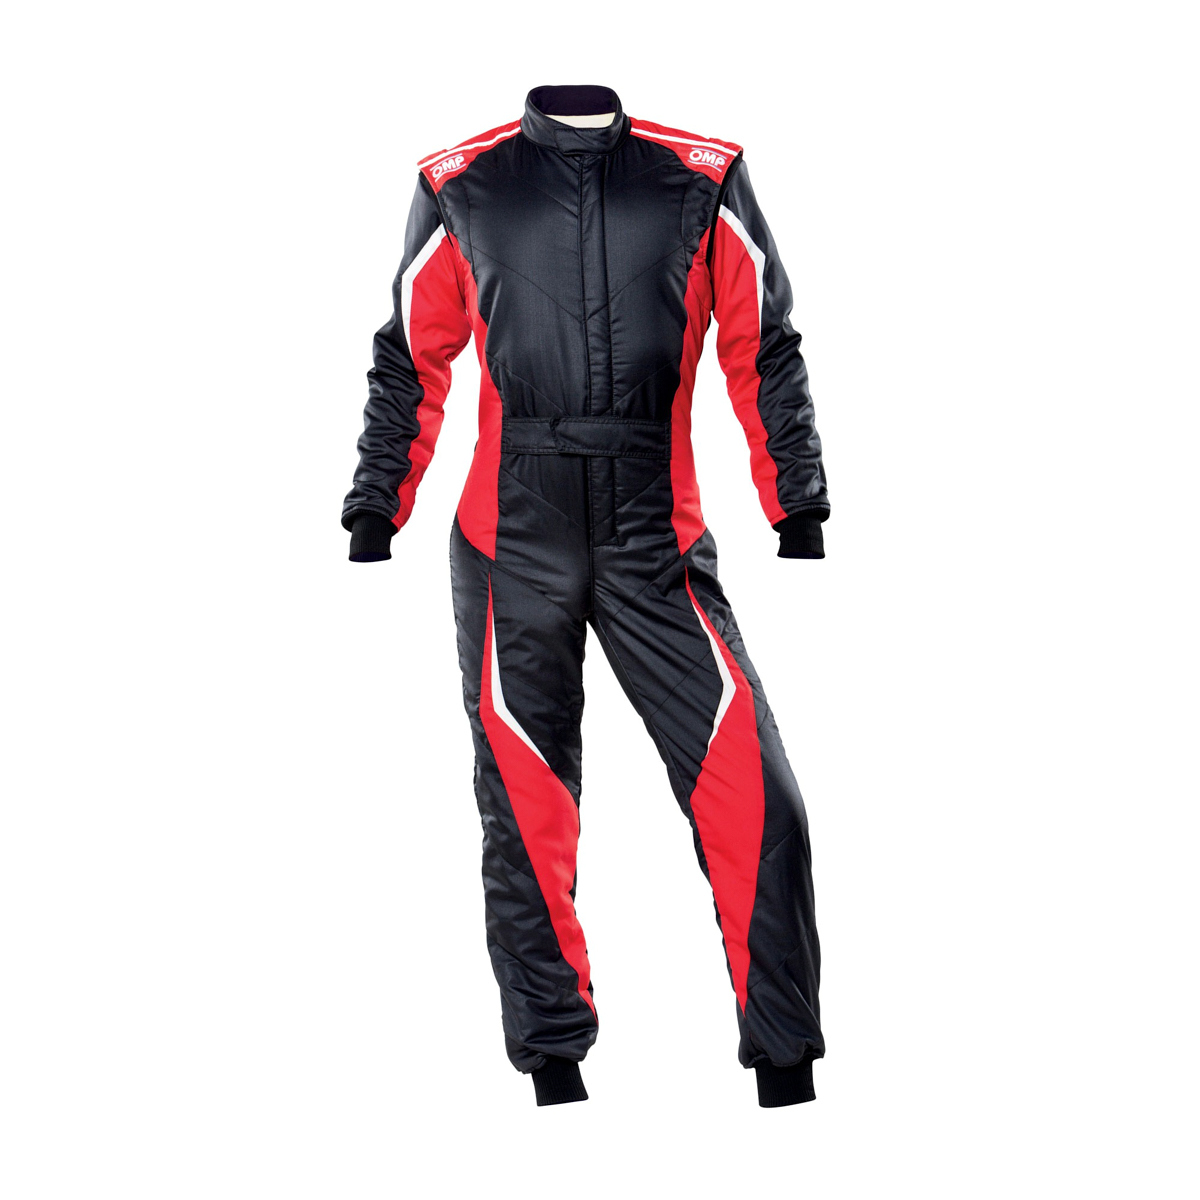 OMP Racing IA01859E06052 Driving Suit, Tecnica Evo, 1-Piece, SFI 3.2A/5, FIA Approved, Double Layer, Fire Retardant Fabric, Black / Red, Size 52, Each